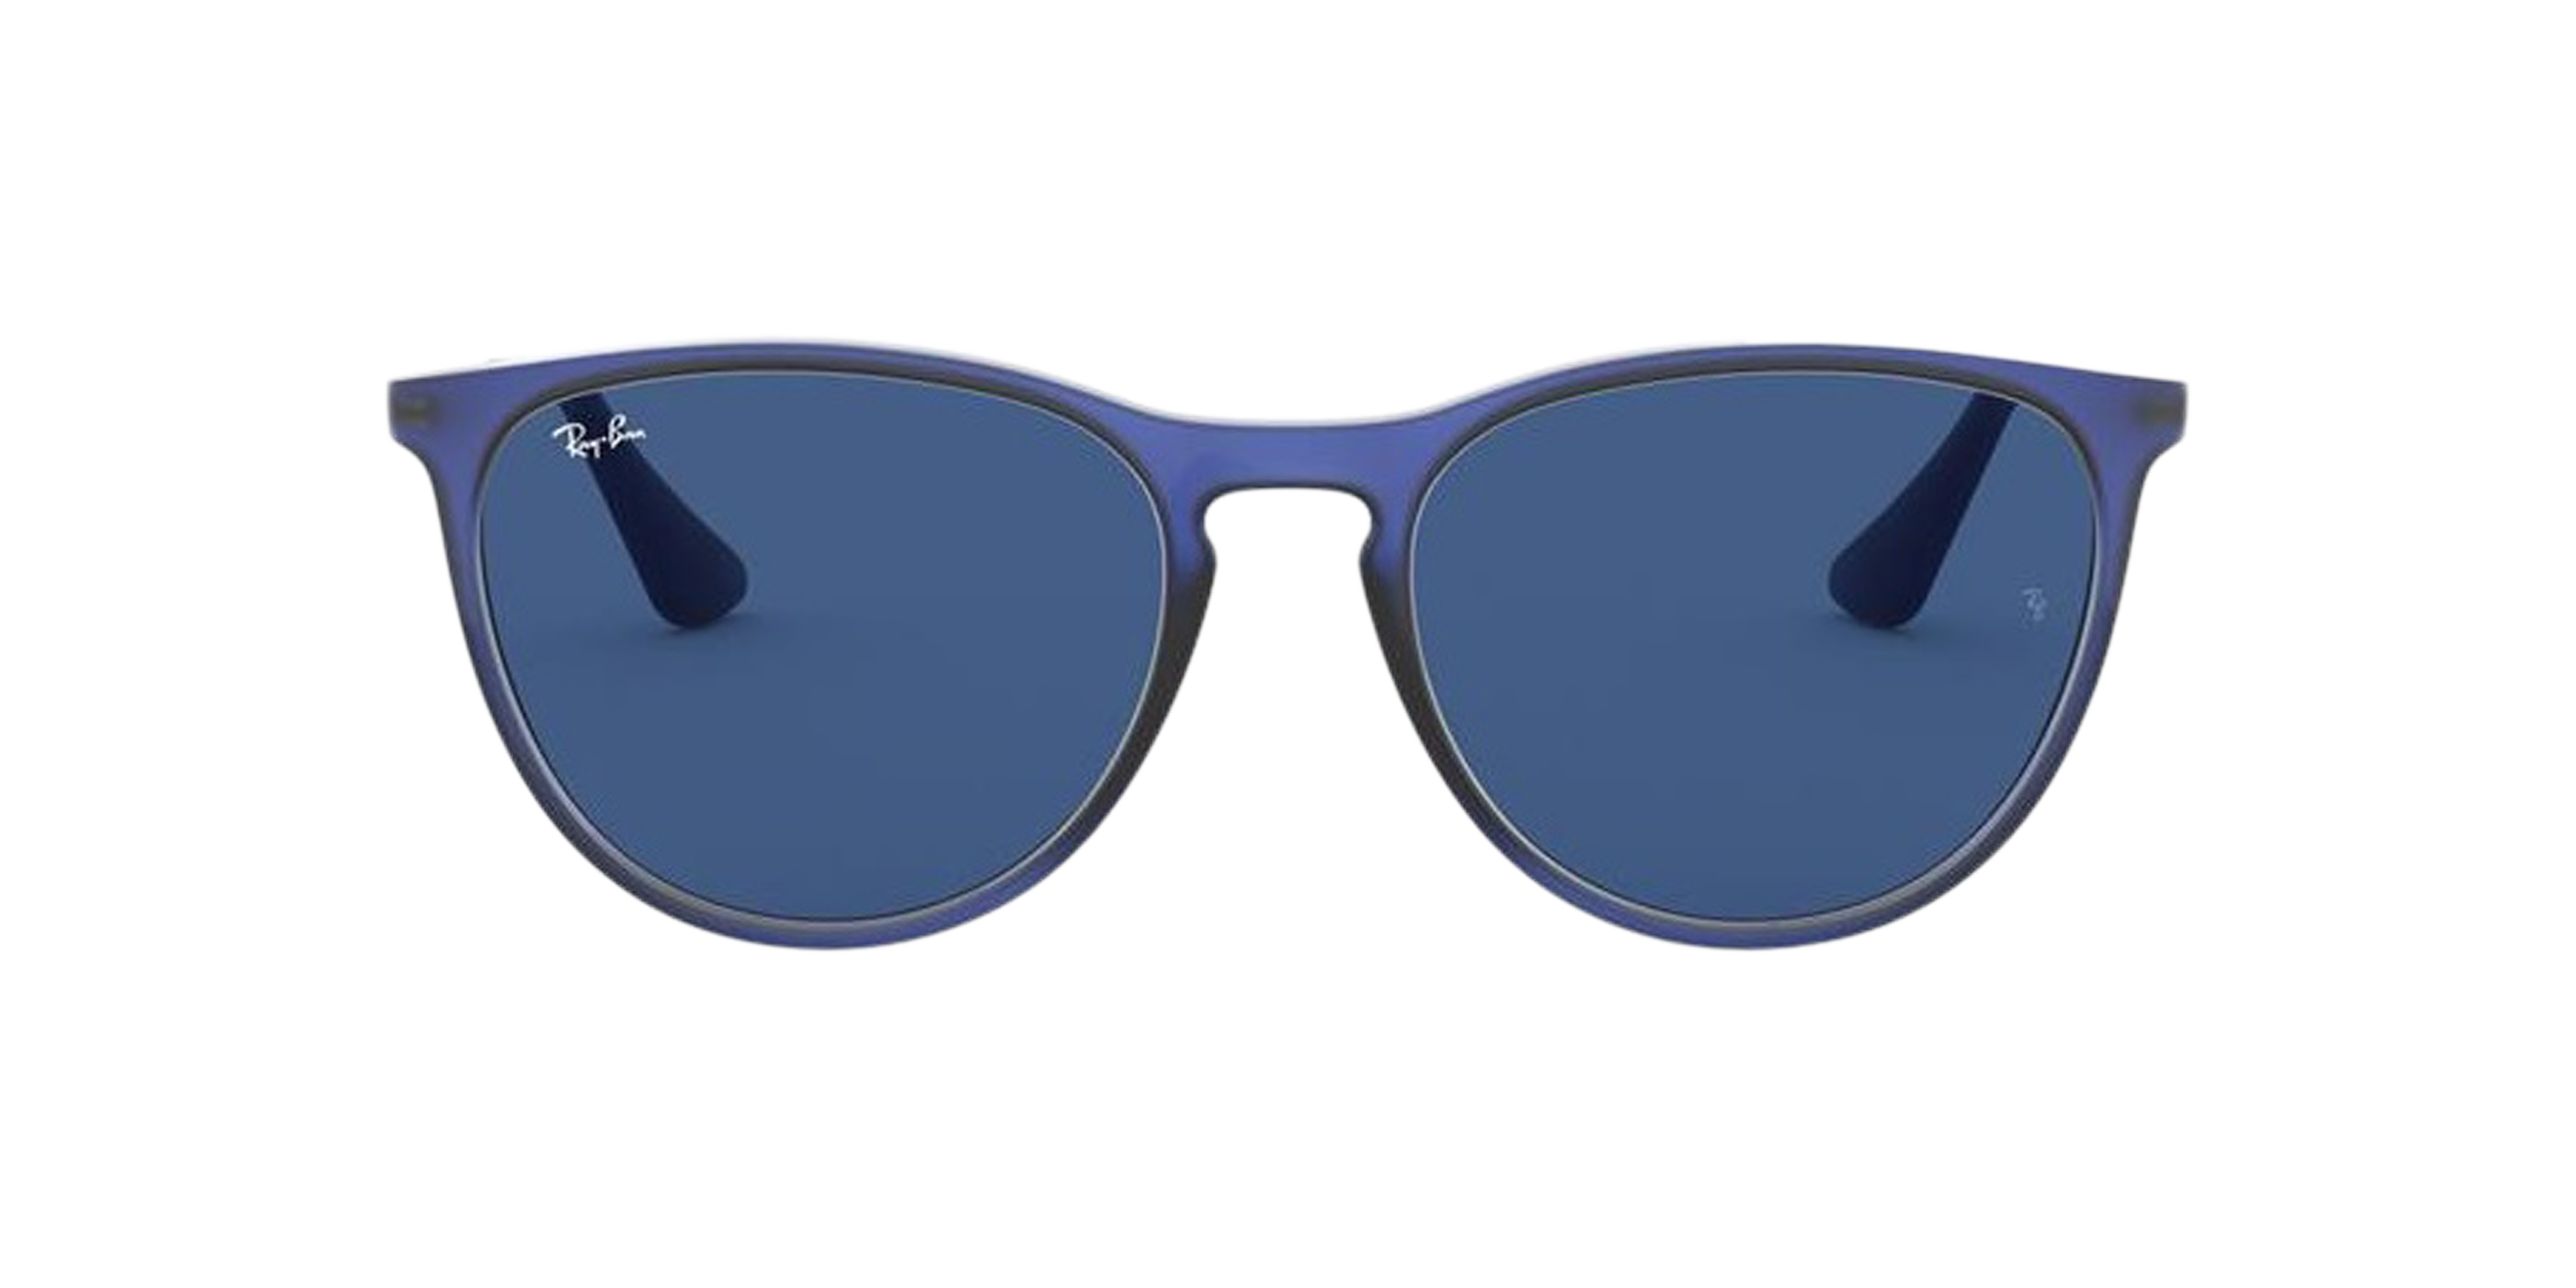 [products.image.front] Ray-Ban Junior Erika RJ9060S 706080